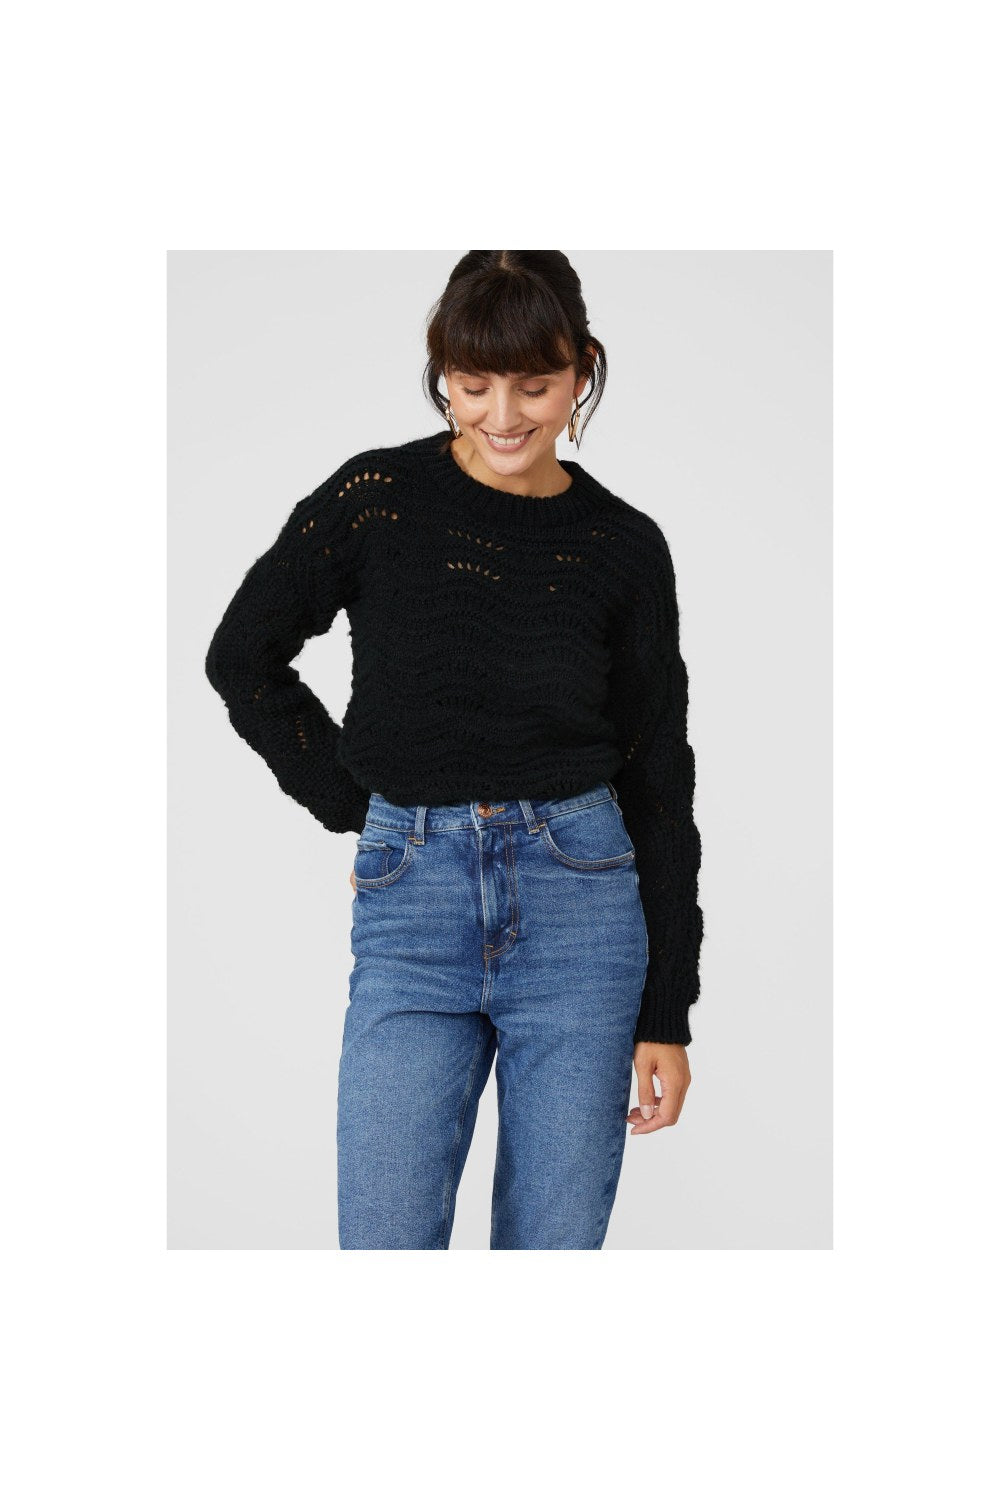 Womens/Ladies Wave Cable Knit Sweater - Black